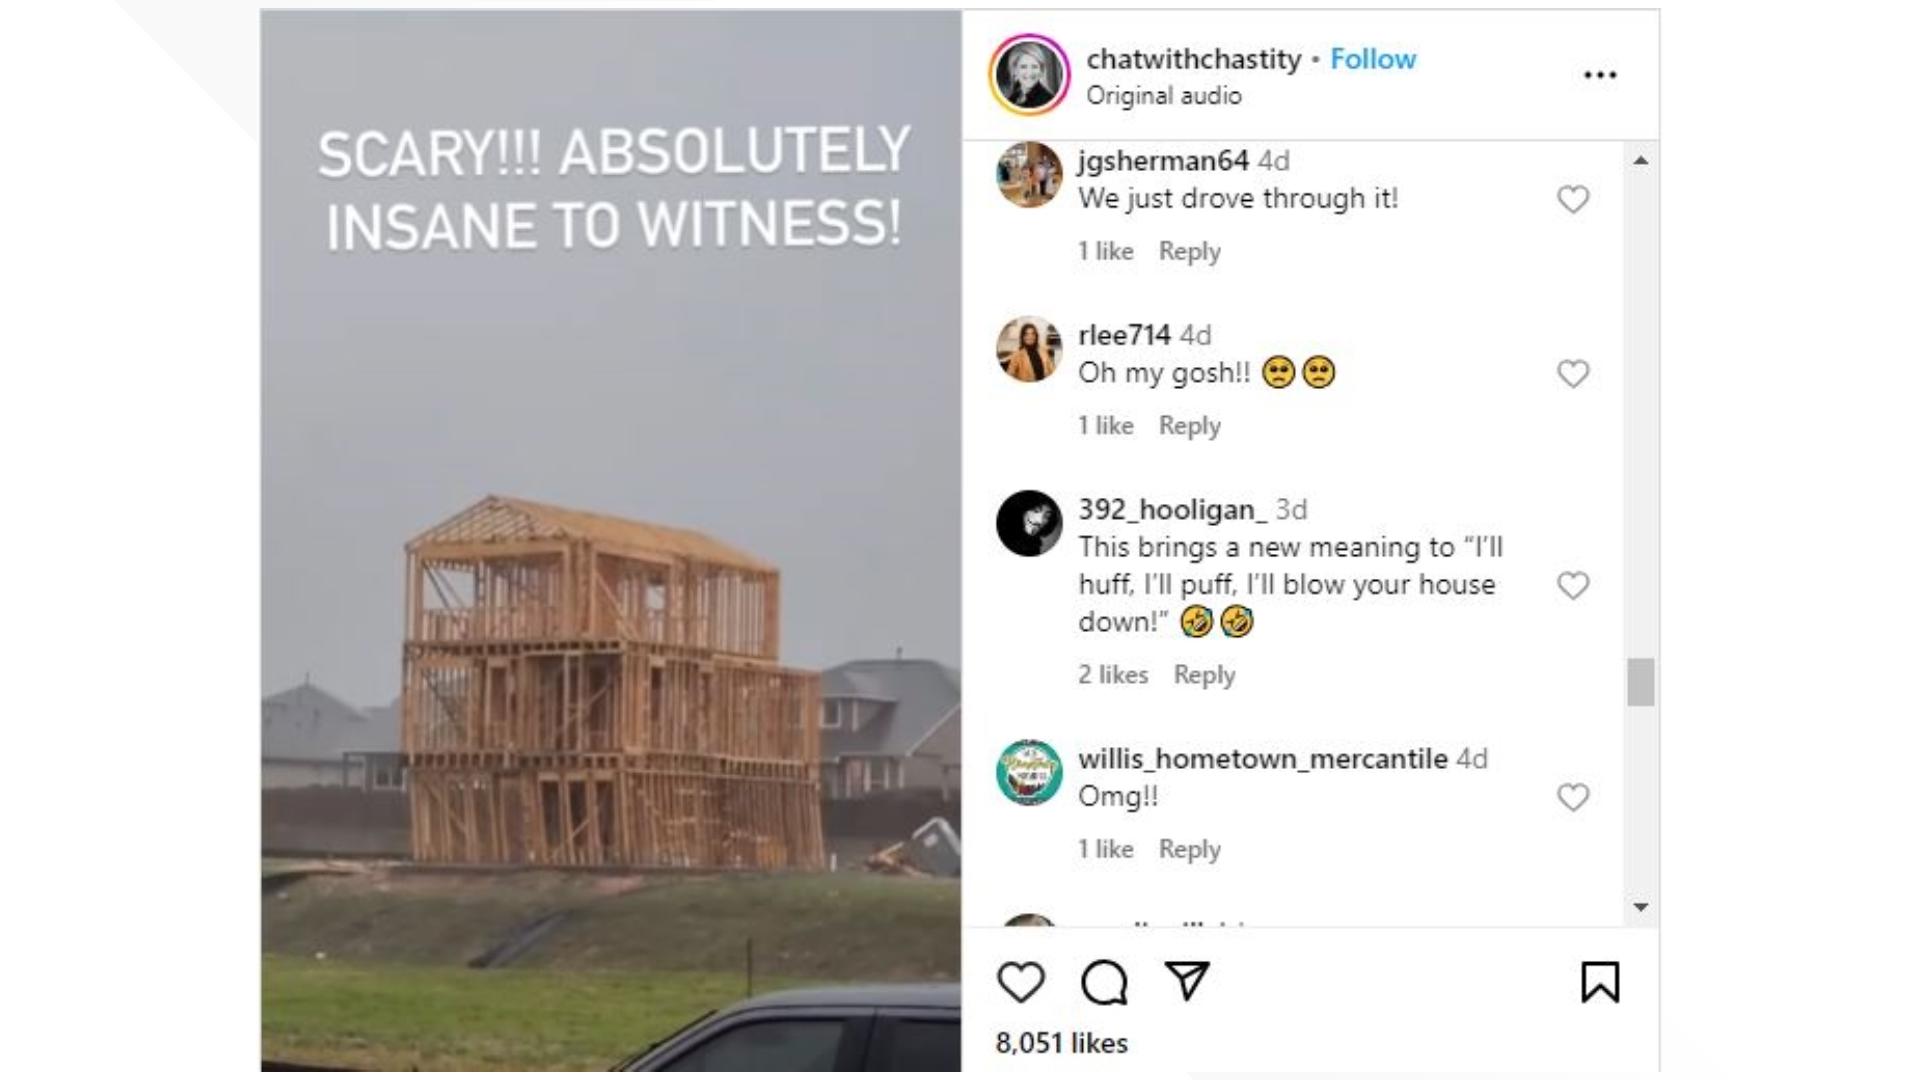 Thousands of comments reference the video game "Angry Birds'' and the fable of "The Three Little Pigs" to describe the home collapsing in the middle of the storm.